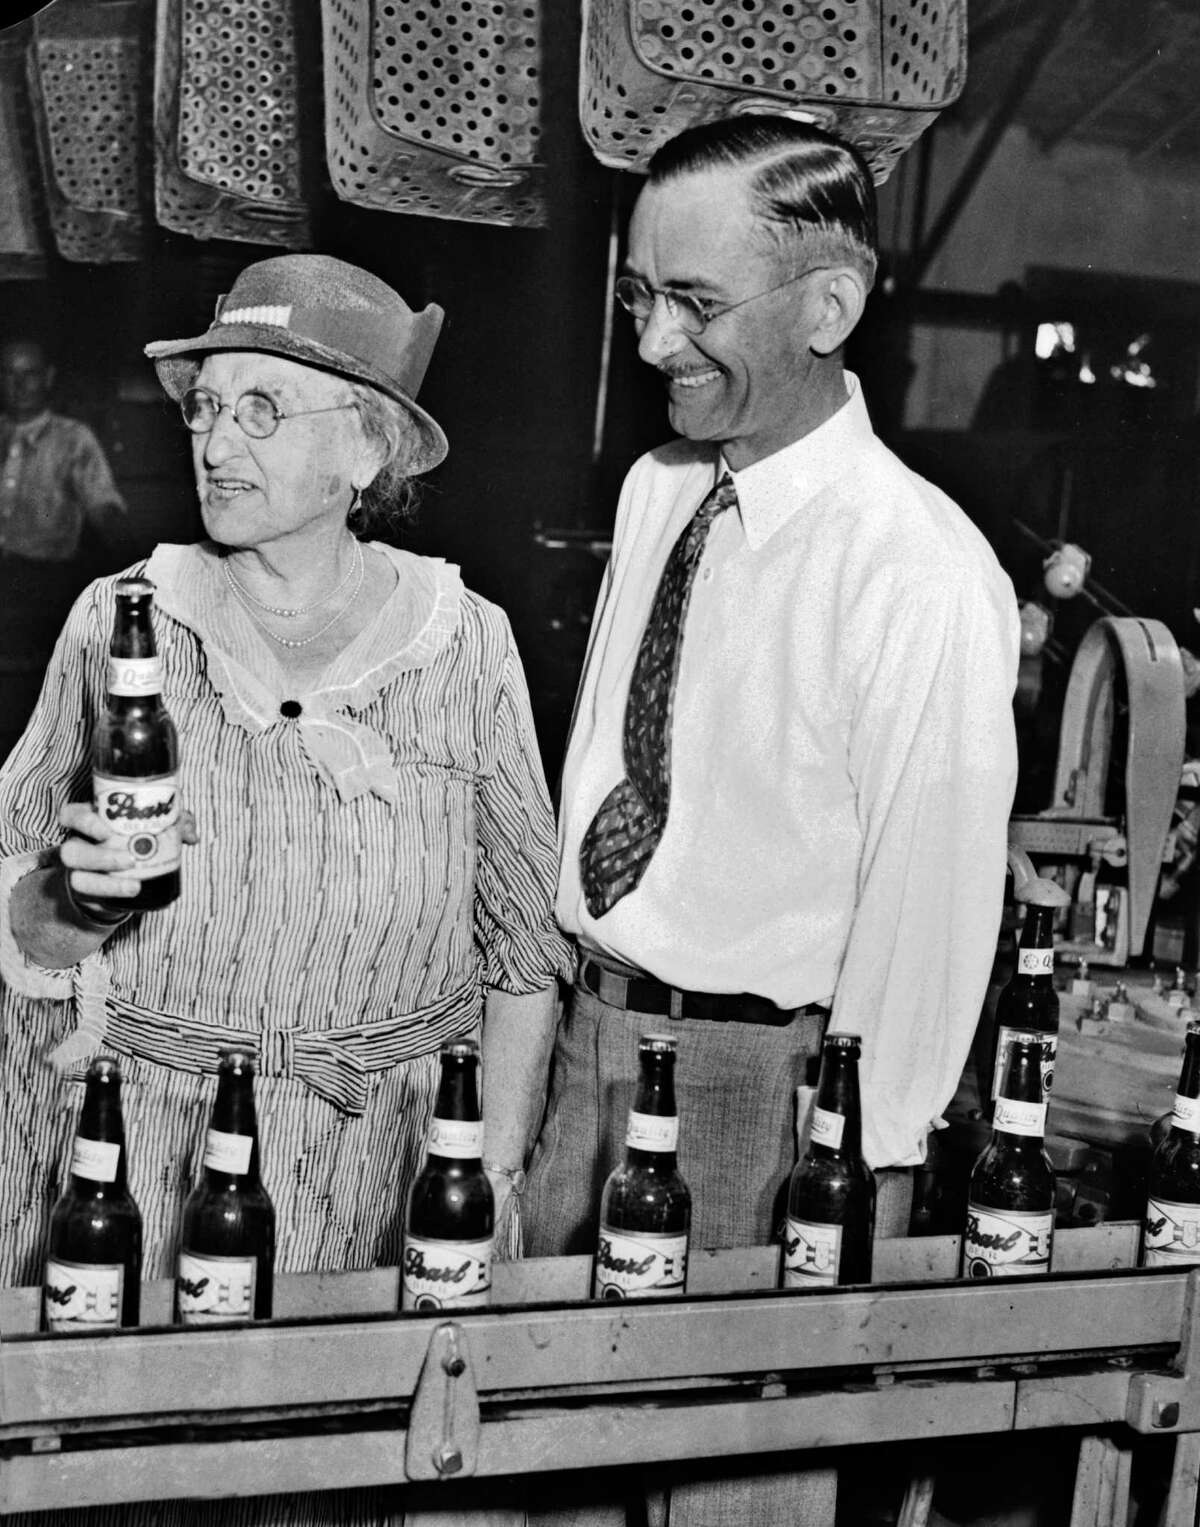 Emma Koehler, widow of San Antonio Brewery Association founder Otto Koehler, and brewery general manager B.B. McGimsey watch the first bottle of Pearl beer leave the vats after the repeal of Prohibition in 1933. ﻿ ﻿